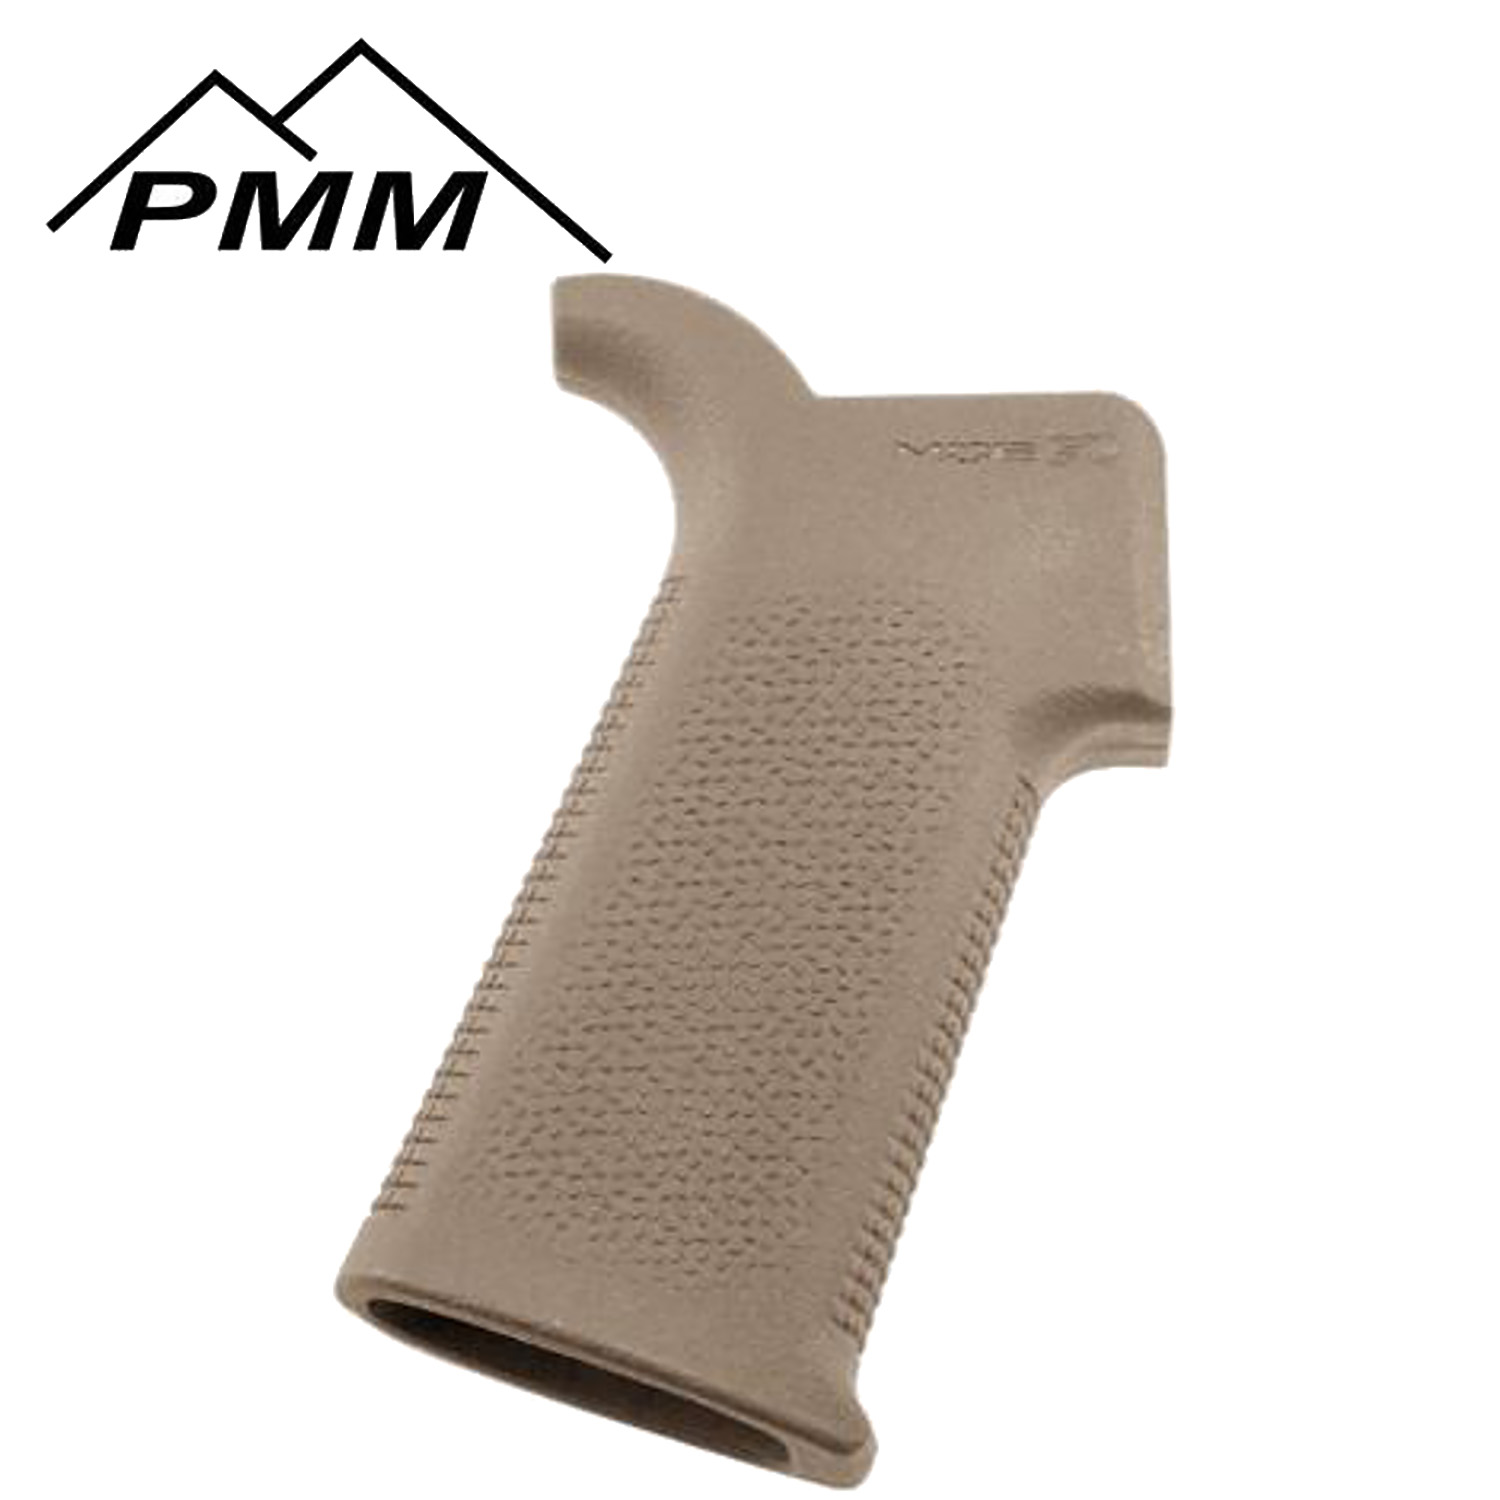 Anarchy outdoors penguin grip